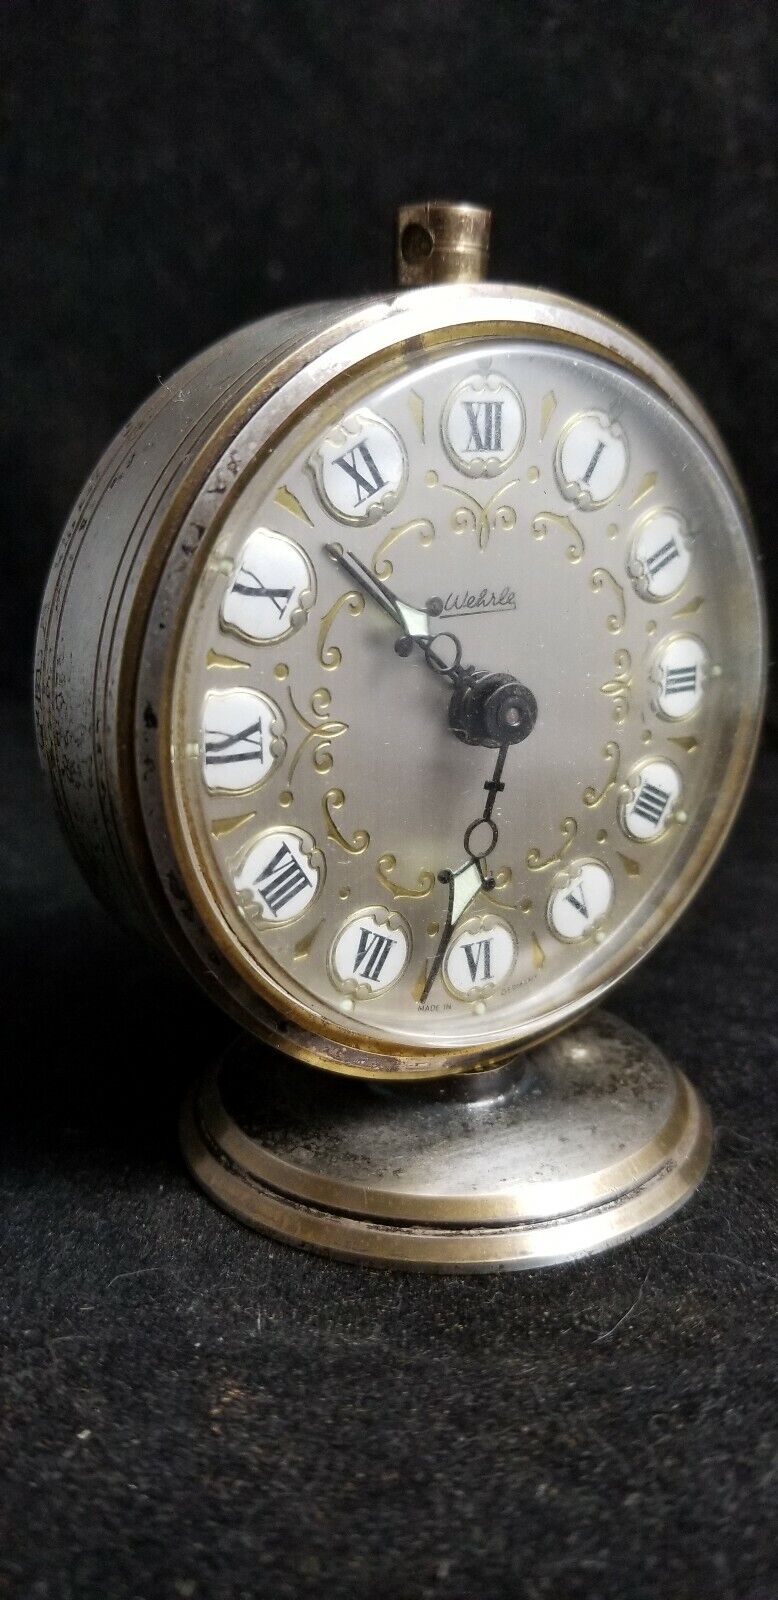 Vintage German WEHRLE TROLLY Silver And Gold Mantel Alarm Clock 1960's Parts @56